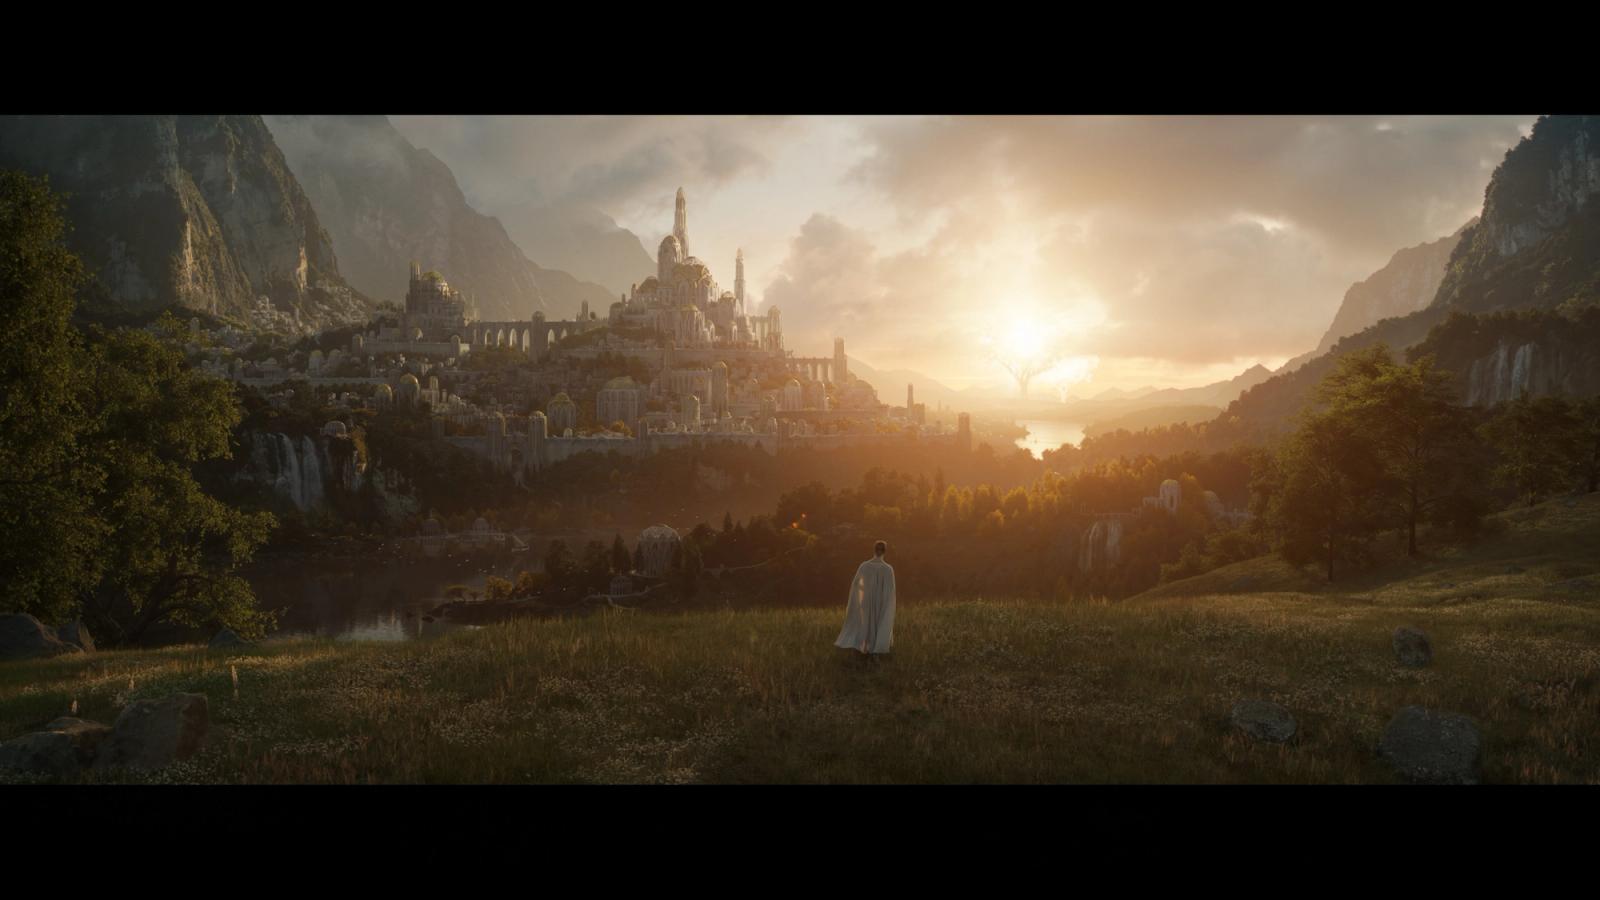 Wide shot of Middle Earth from the Amazon show.